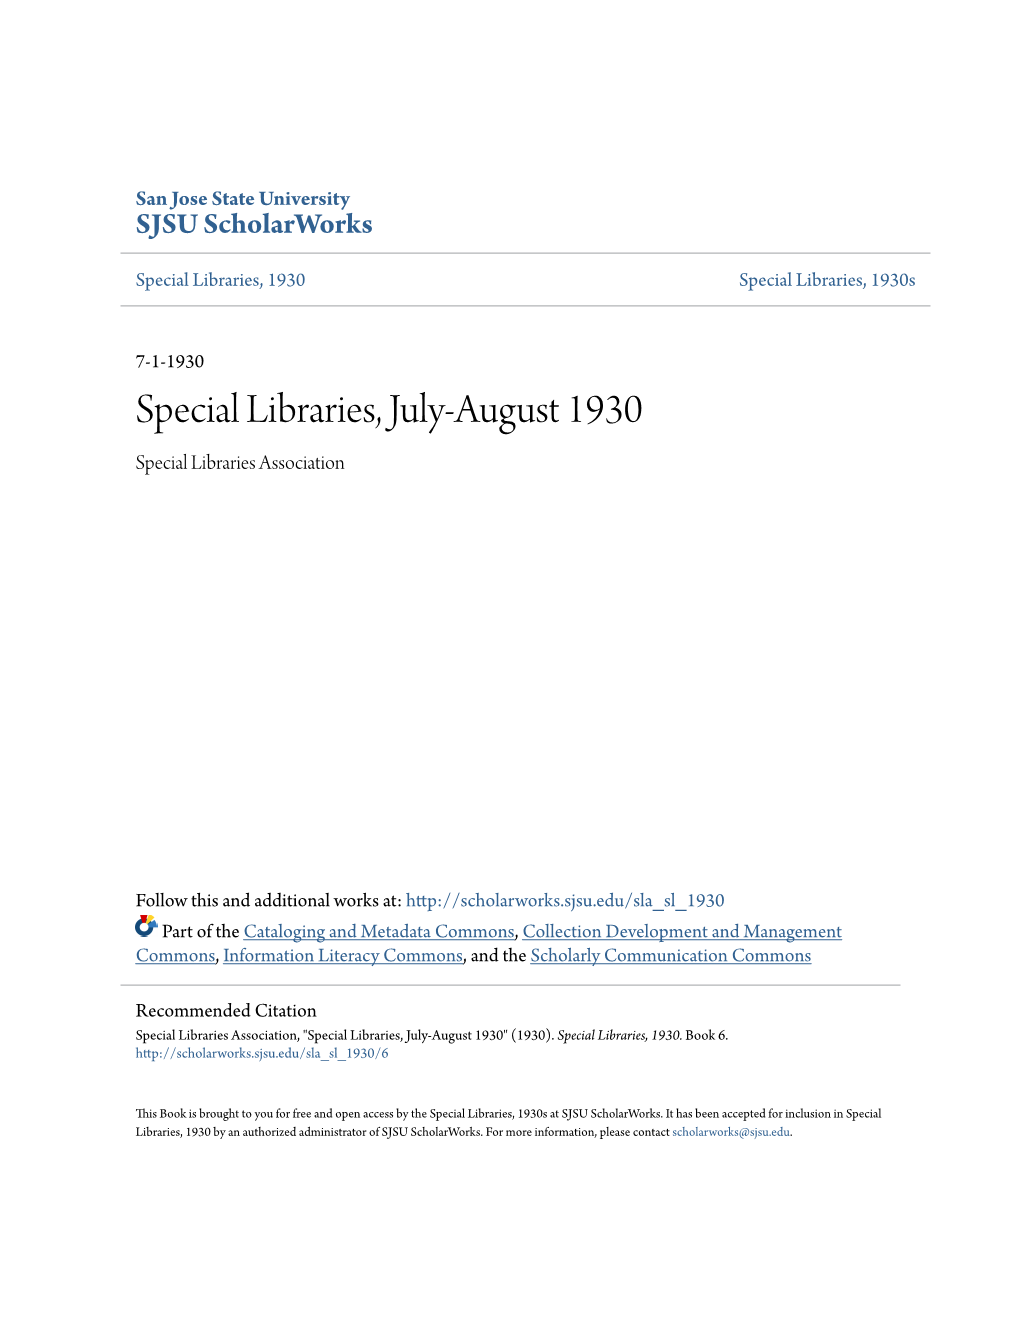 Special Libraries, July-August 1930 Special Libraries Association